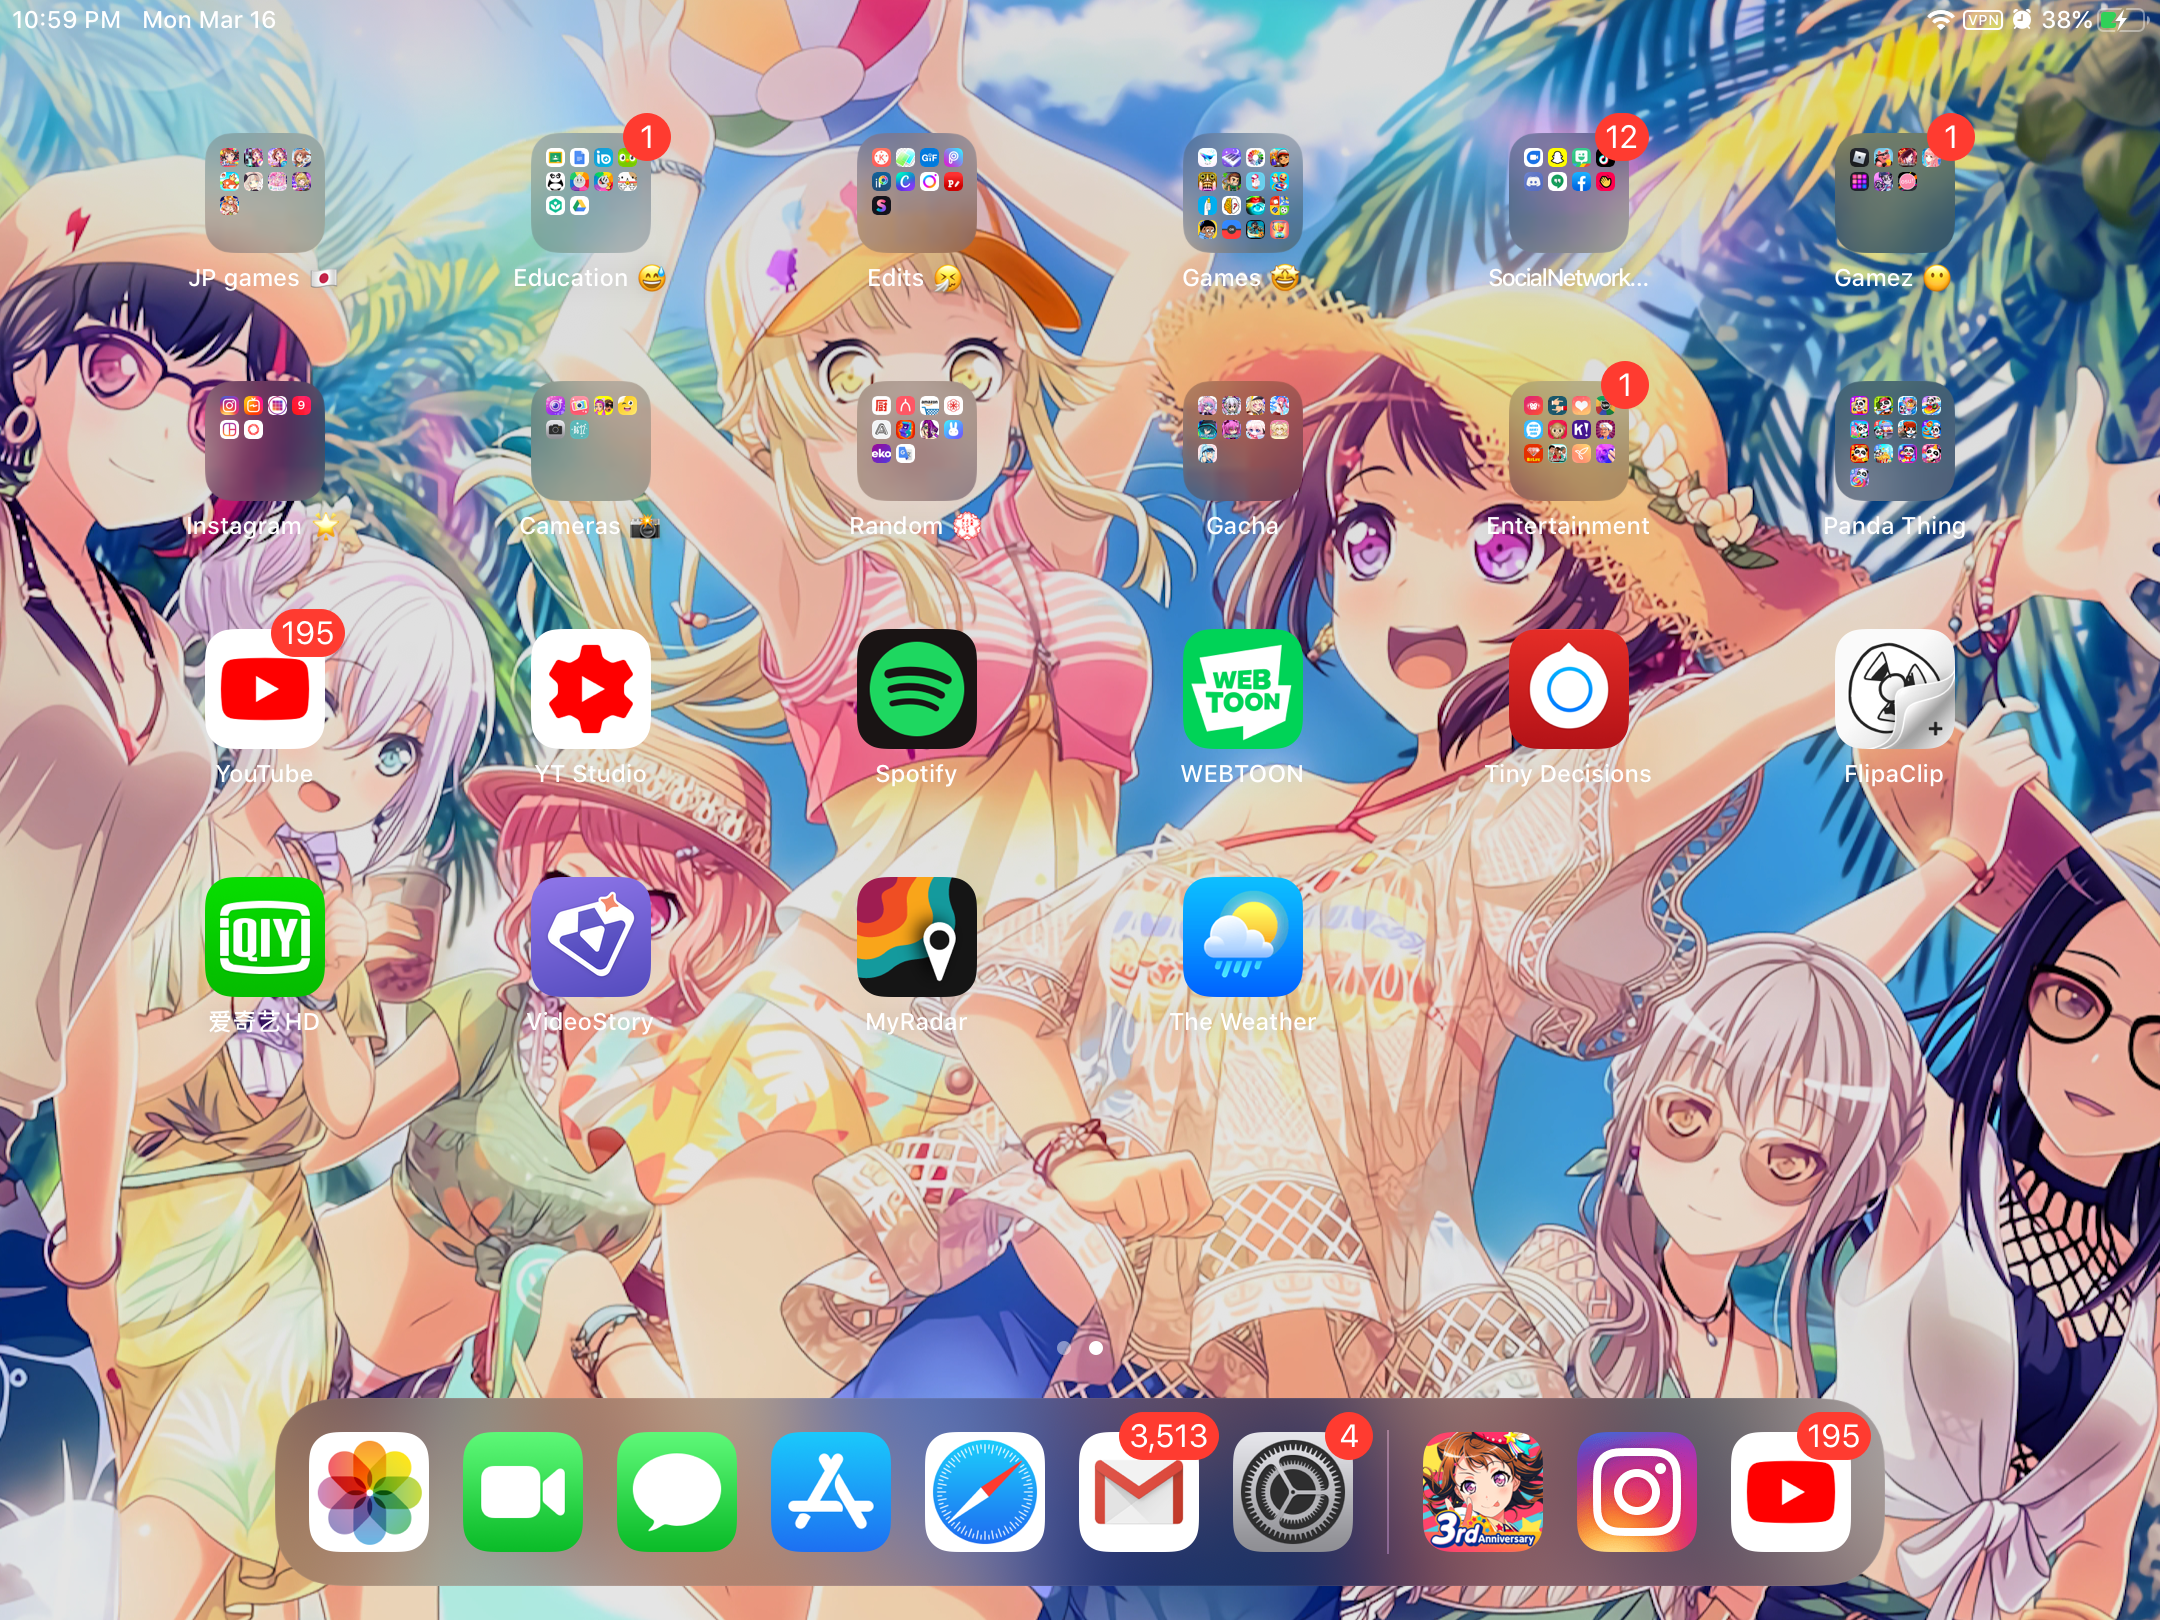 sookie bday d  7  on Twitter also did this 2 Aya pinkSakura  themed wallpapers if you want a bandorilove livepokemon trainer  wallpaper like this let me know httpstco3GbcZagGz0  Twitter